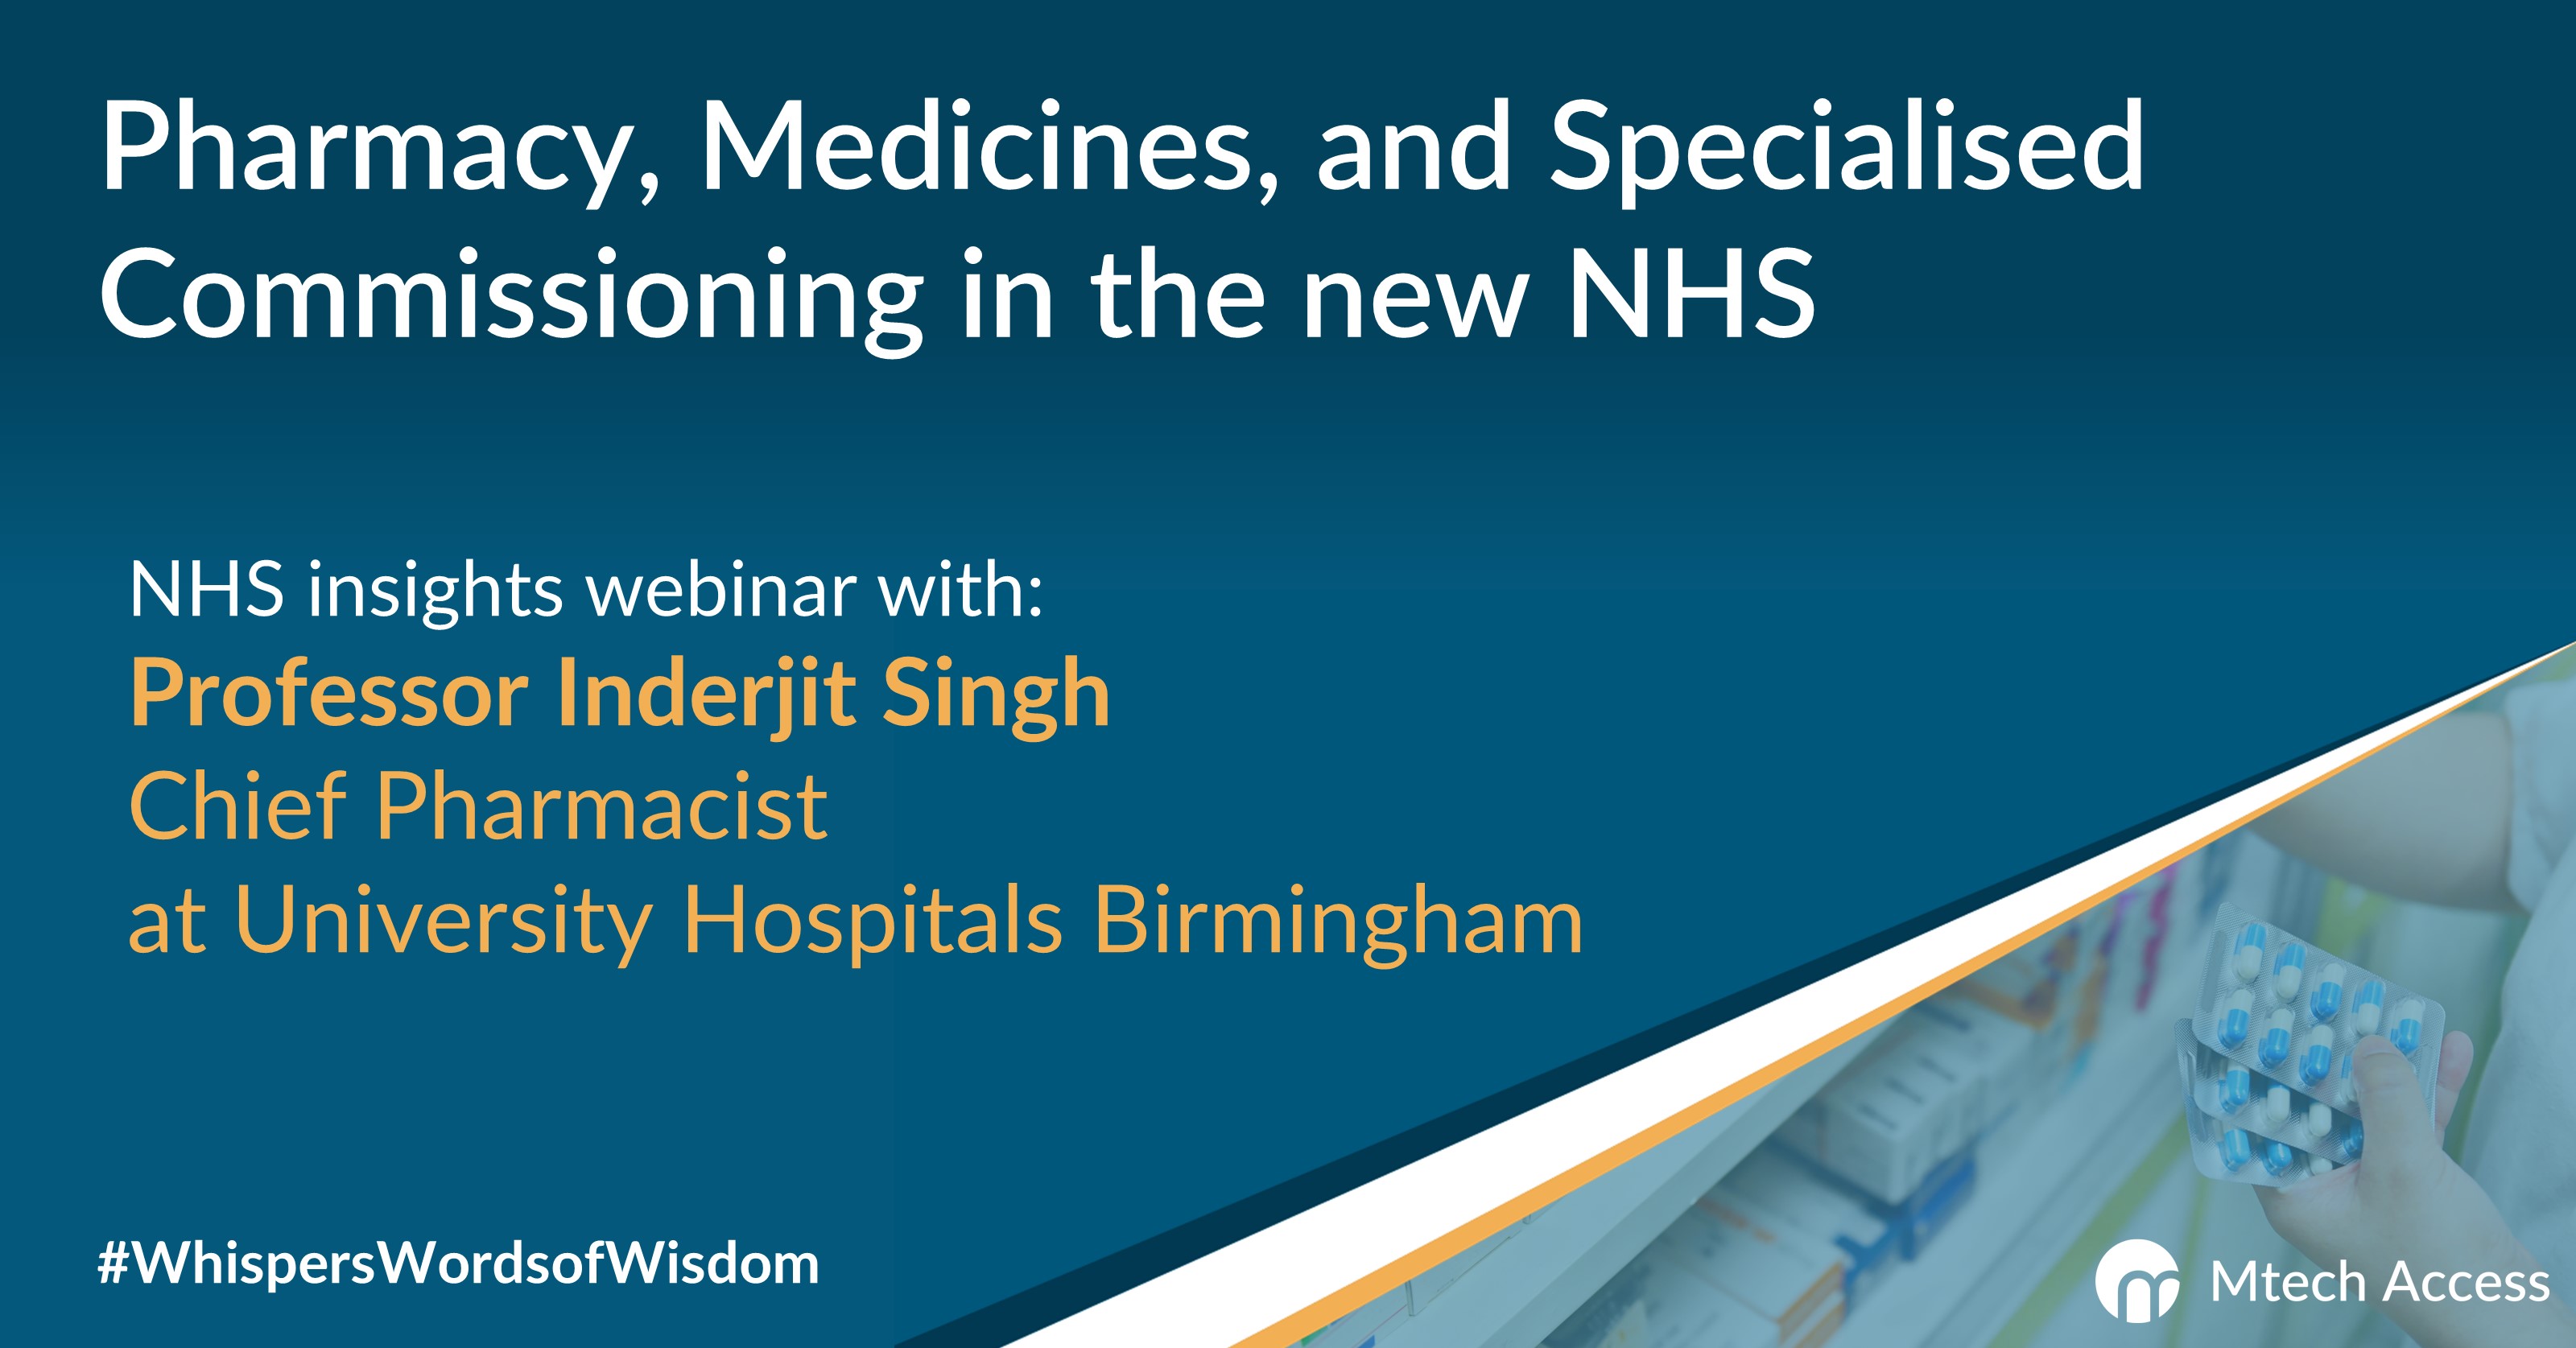 Pharmacy, Medicines, and Specialised Commissioning in the new NHS - NHS insights webinar with: Professor Inderjit Singh Chief Pharmacist at University Hospitals Birmingham